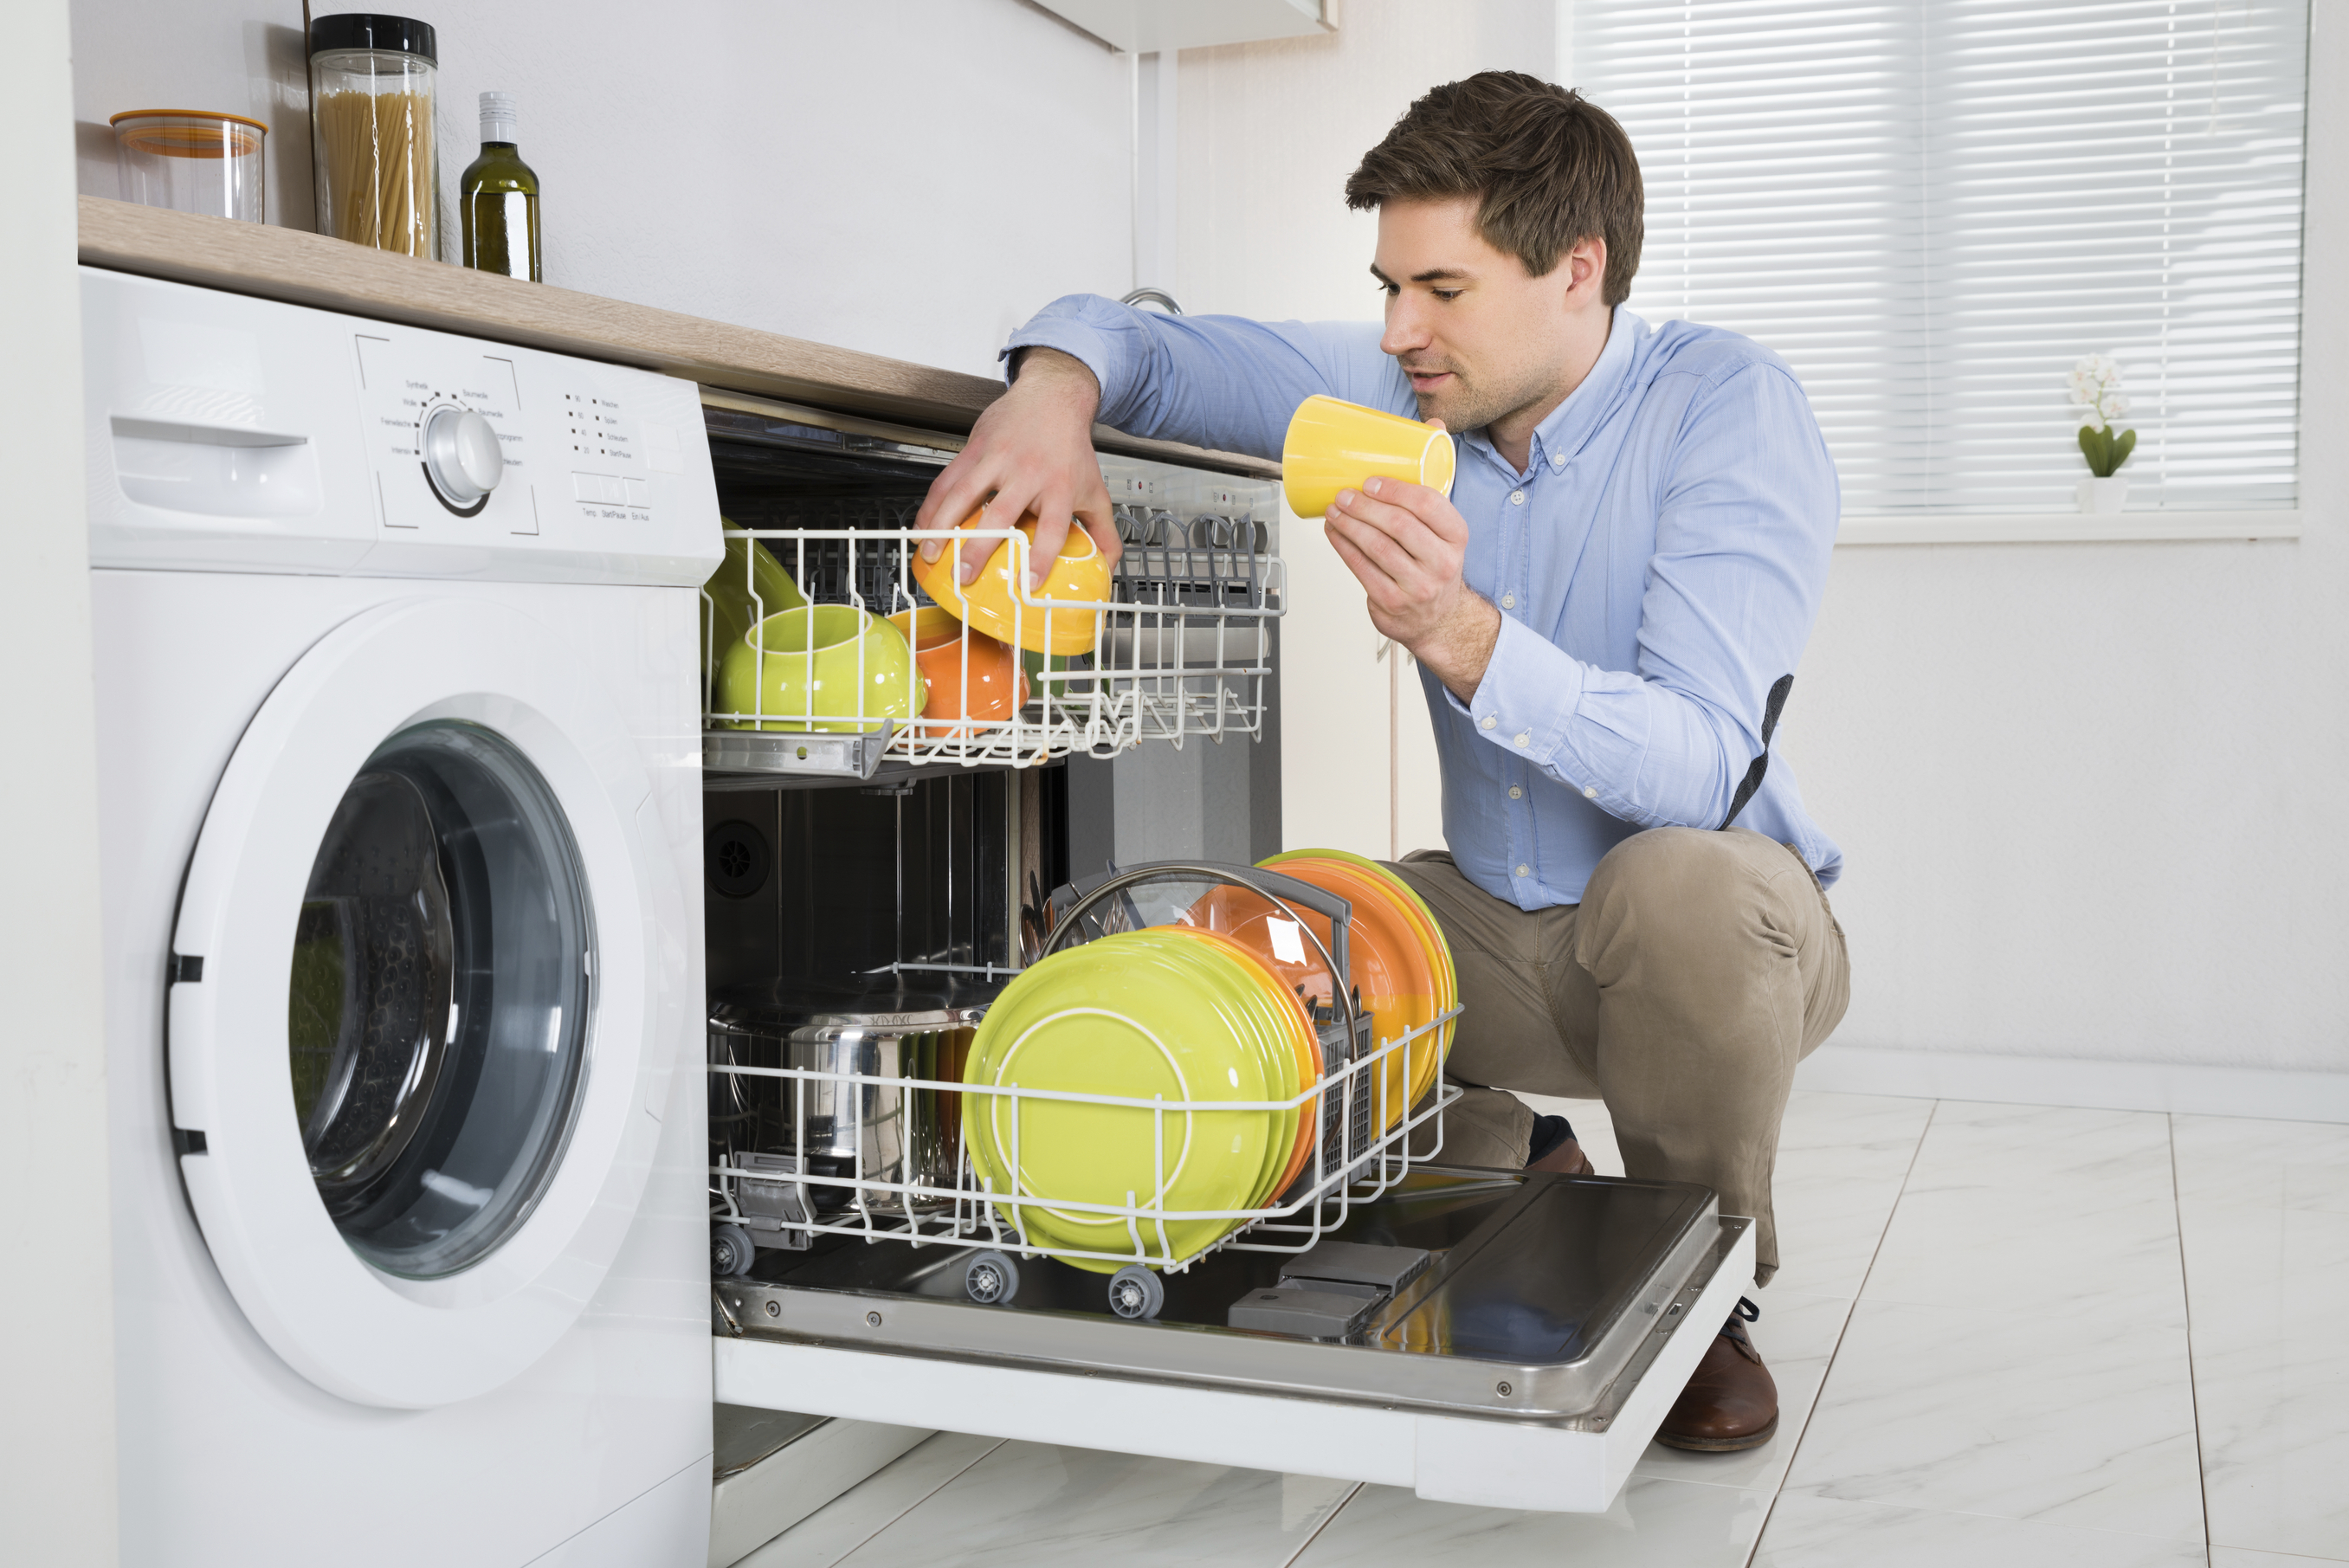 7 Tips to Properly Clean Your Dishwasher